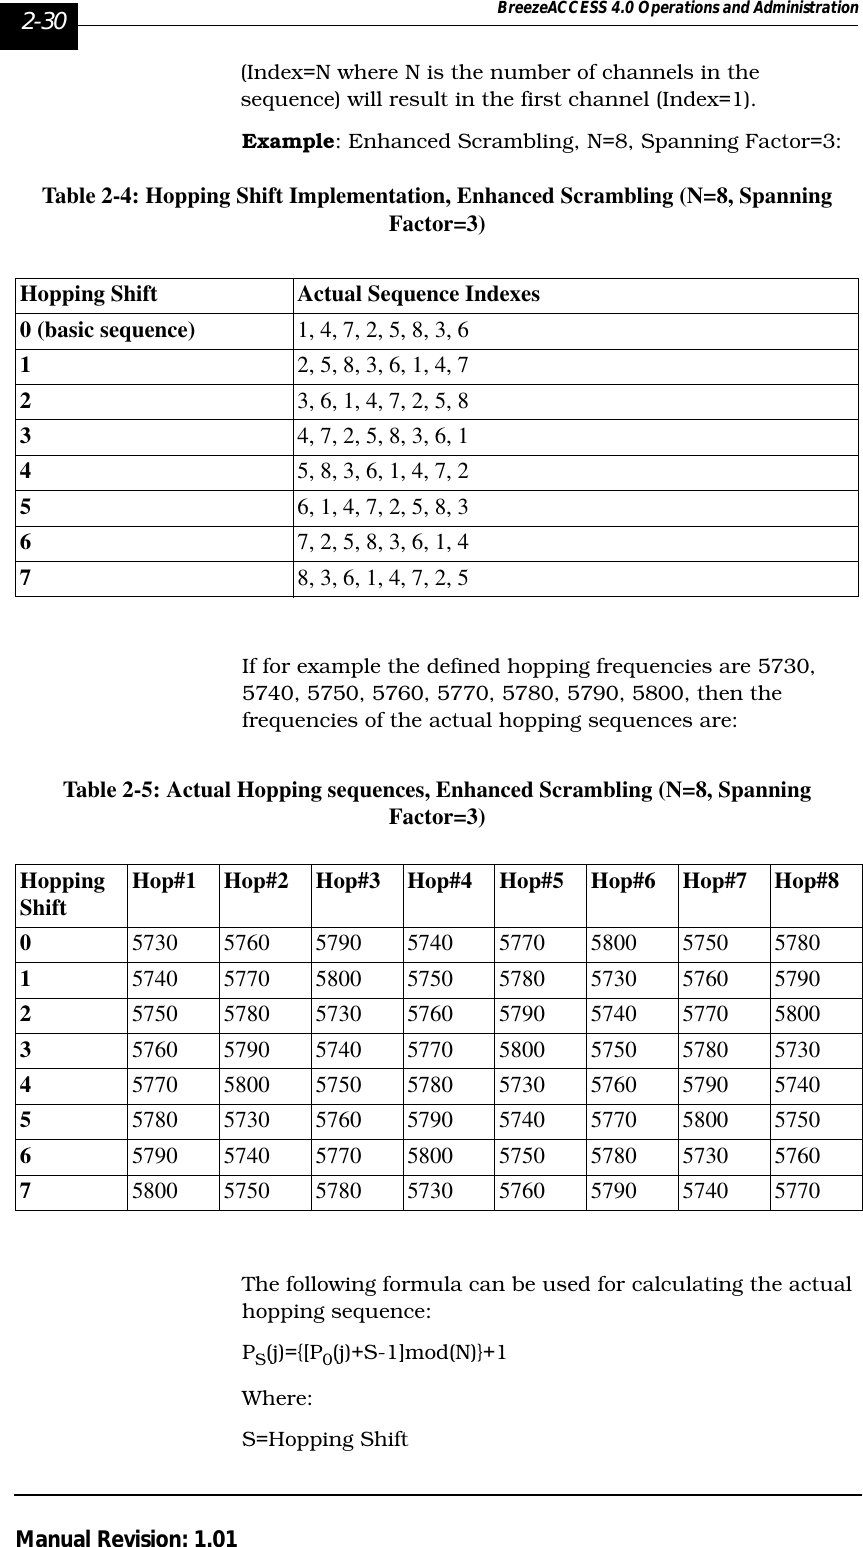 2-30 BreezeACCESS 4.0 Operations and AdministrationManual Revision: 1.01(Index=N where N is the number of channels in the sequence) will result in the first channel (Index=1). Example: Enhanced Scrambling, N=8, Spanning Factor=3:Table 2-4: Hopping Shift Implementation, Enhanced Scrambling (N=8, Spanning Factor=3)If for example the defined hopping frequencies are 5730, 5740, 5750, 5760, 5770, 5780, 5790, 5800, then the frequencies of the actual hopping sequences are:Table 2-5: Actual Hopping sequences, Enhanced Scrambling (N=8, Spanning Factor=3)The following formula can be used for calculating the actual hopping sequence: PS(j)={[P0(j)+S-1]mod(N)}+1 Where:S=Hopping ShiftHopping Shift Actual Sequence Indexes0 (basic sequence) 1, 4, 7, 2, 5, 8, 3, 612, 5, 8, 3, 6, 1, 4, 723, 6, 1, 4, 7, 2, 5, 834, 7, 2, 5, 8, 3, 6, 145, 8, 3, 6, 1, 4, 7, 256, 1, 4, 7, 2, 5, 8, 367, 2, 5, 8, 3, 6, 1, 478, 3, 6, 1, 4, 7, 2, 5Hopping Shift Hop#1 Hop#2 Hop#3 Hop#4 Hop#5 Hop#6 Hop#7 Hop#805730 5760 5790 5740 5770 5800 5750 578015740 5770 5800 5750 5780 5730 5760 579025750 5780 5730 5760 5790 5740 5770 580035760 5790 5740 5770 5800 5750 5780 573045770 5800 5750 5780 5730 5760 5790 574055780 5730 5760 5790 5740 5770 5800 575065790 5740 5770 5800 5750 5780 5730 576075800 5750 5780 5730 5760 5790 5740 5770